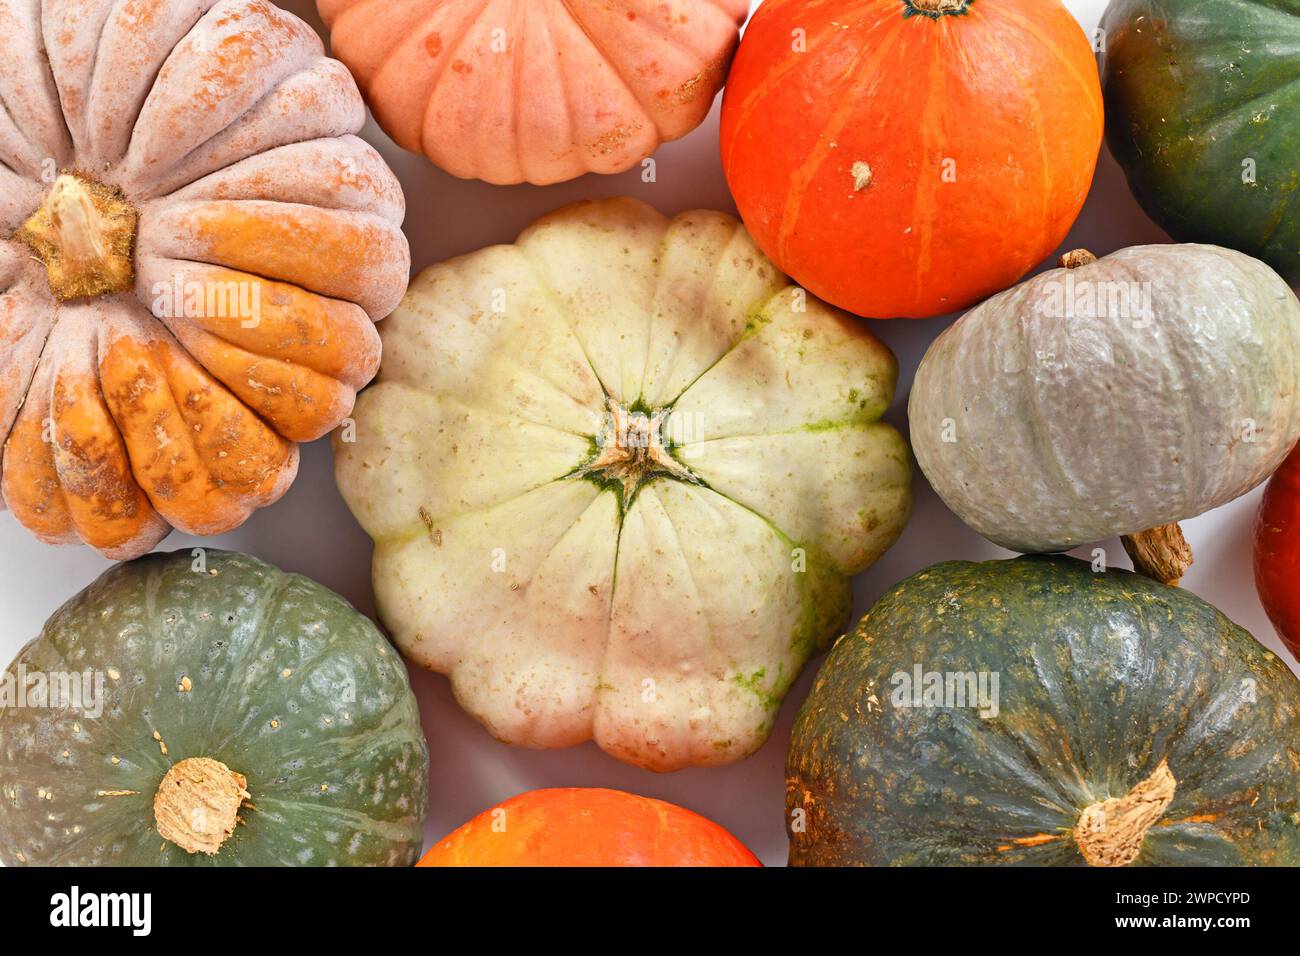 Top view of different pumpkin and squash mix Stock Photo